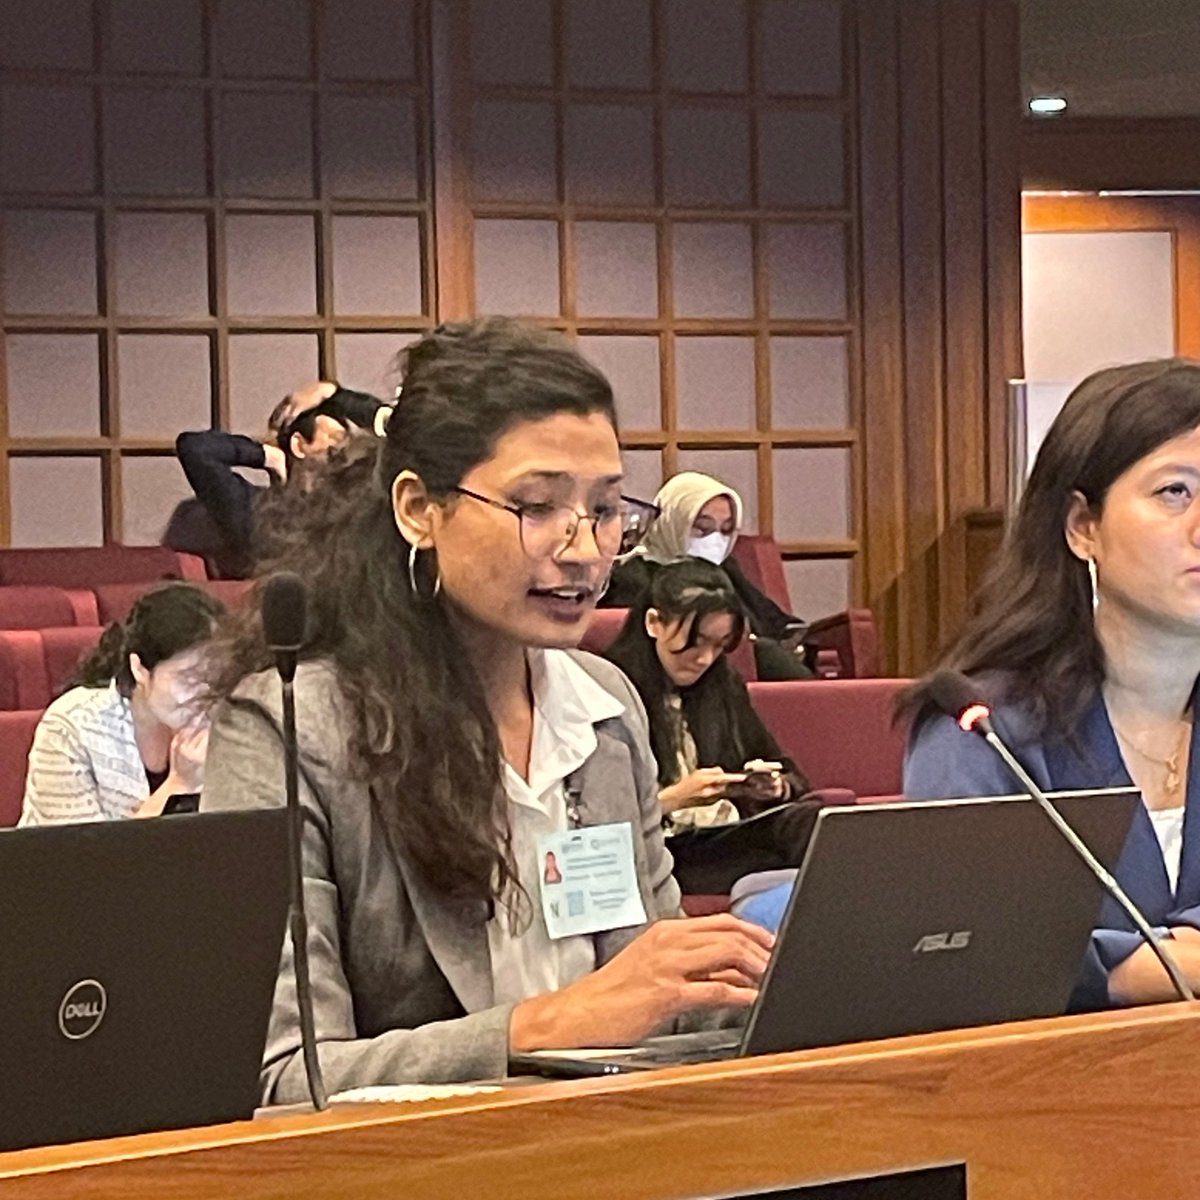 'The Asia-Pacific continues to feel the socio-economic impacts of COVID-19 , manifested in the biggest cost-of-living crisis of the century.' 'The resulting challenges have mostly affected people with the least resources and opportunities.' - Sushma, @BeijingBbc #APFSD @AP_RCEM